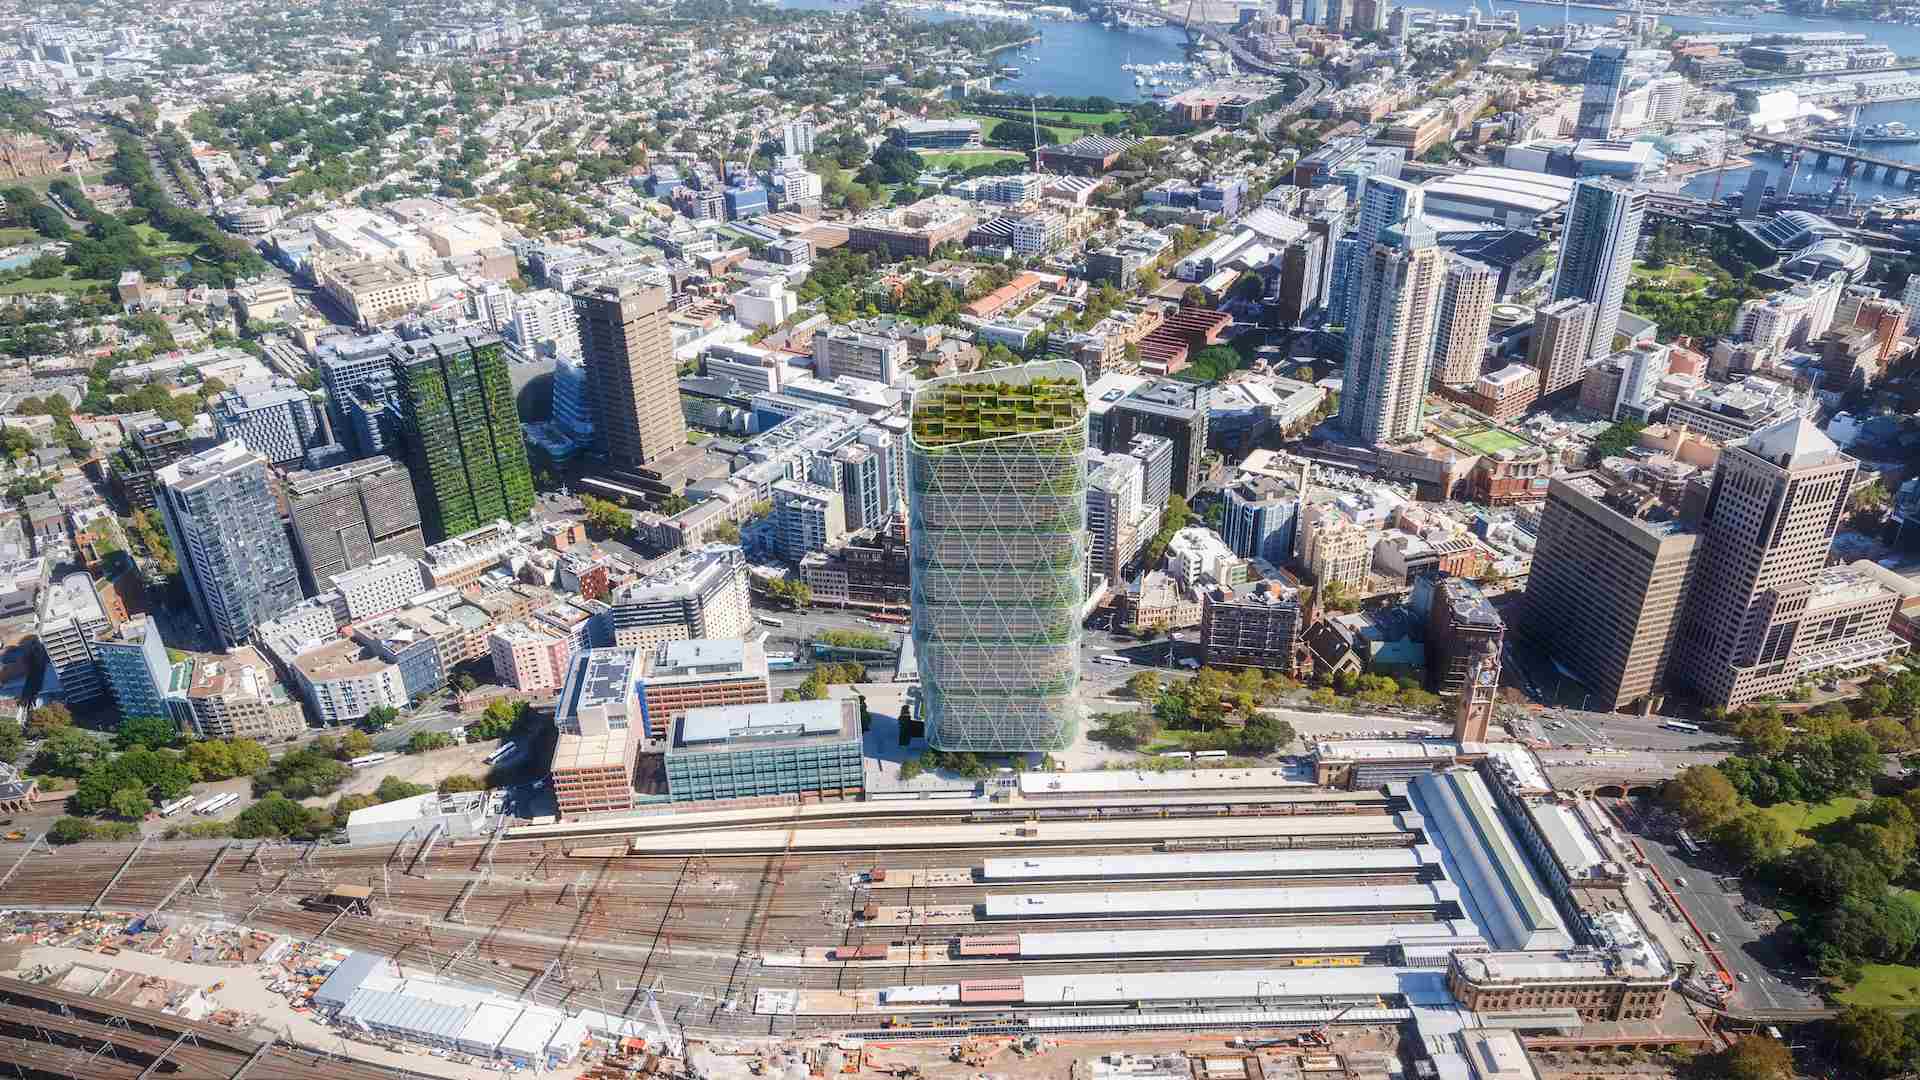 Sydney Will Soon Be Home to the World's Tallest 'Hybrid Timber' Tower with a Rooftop Park